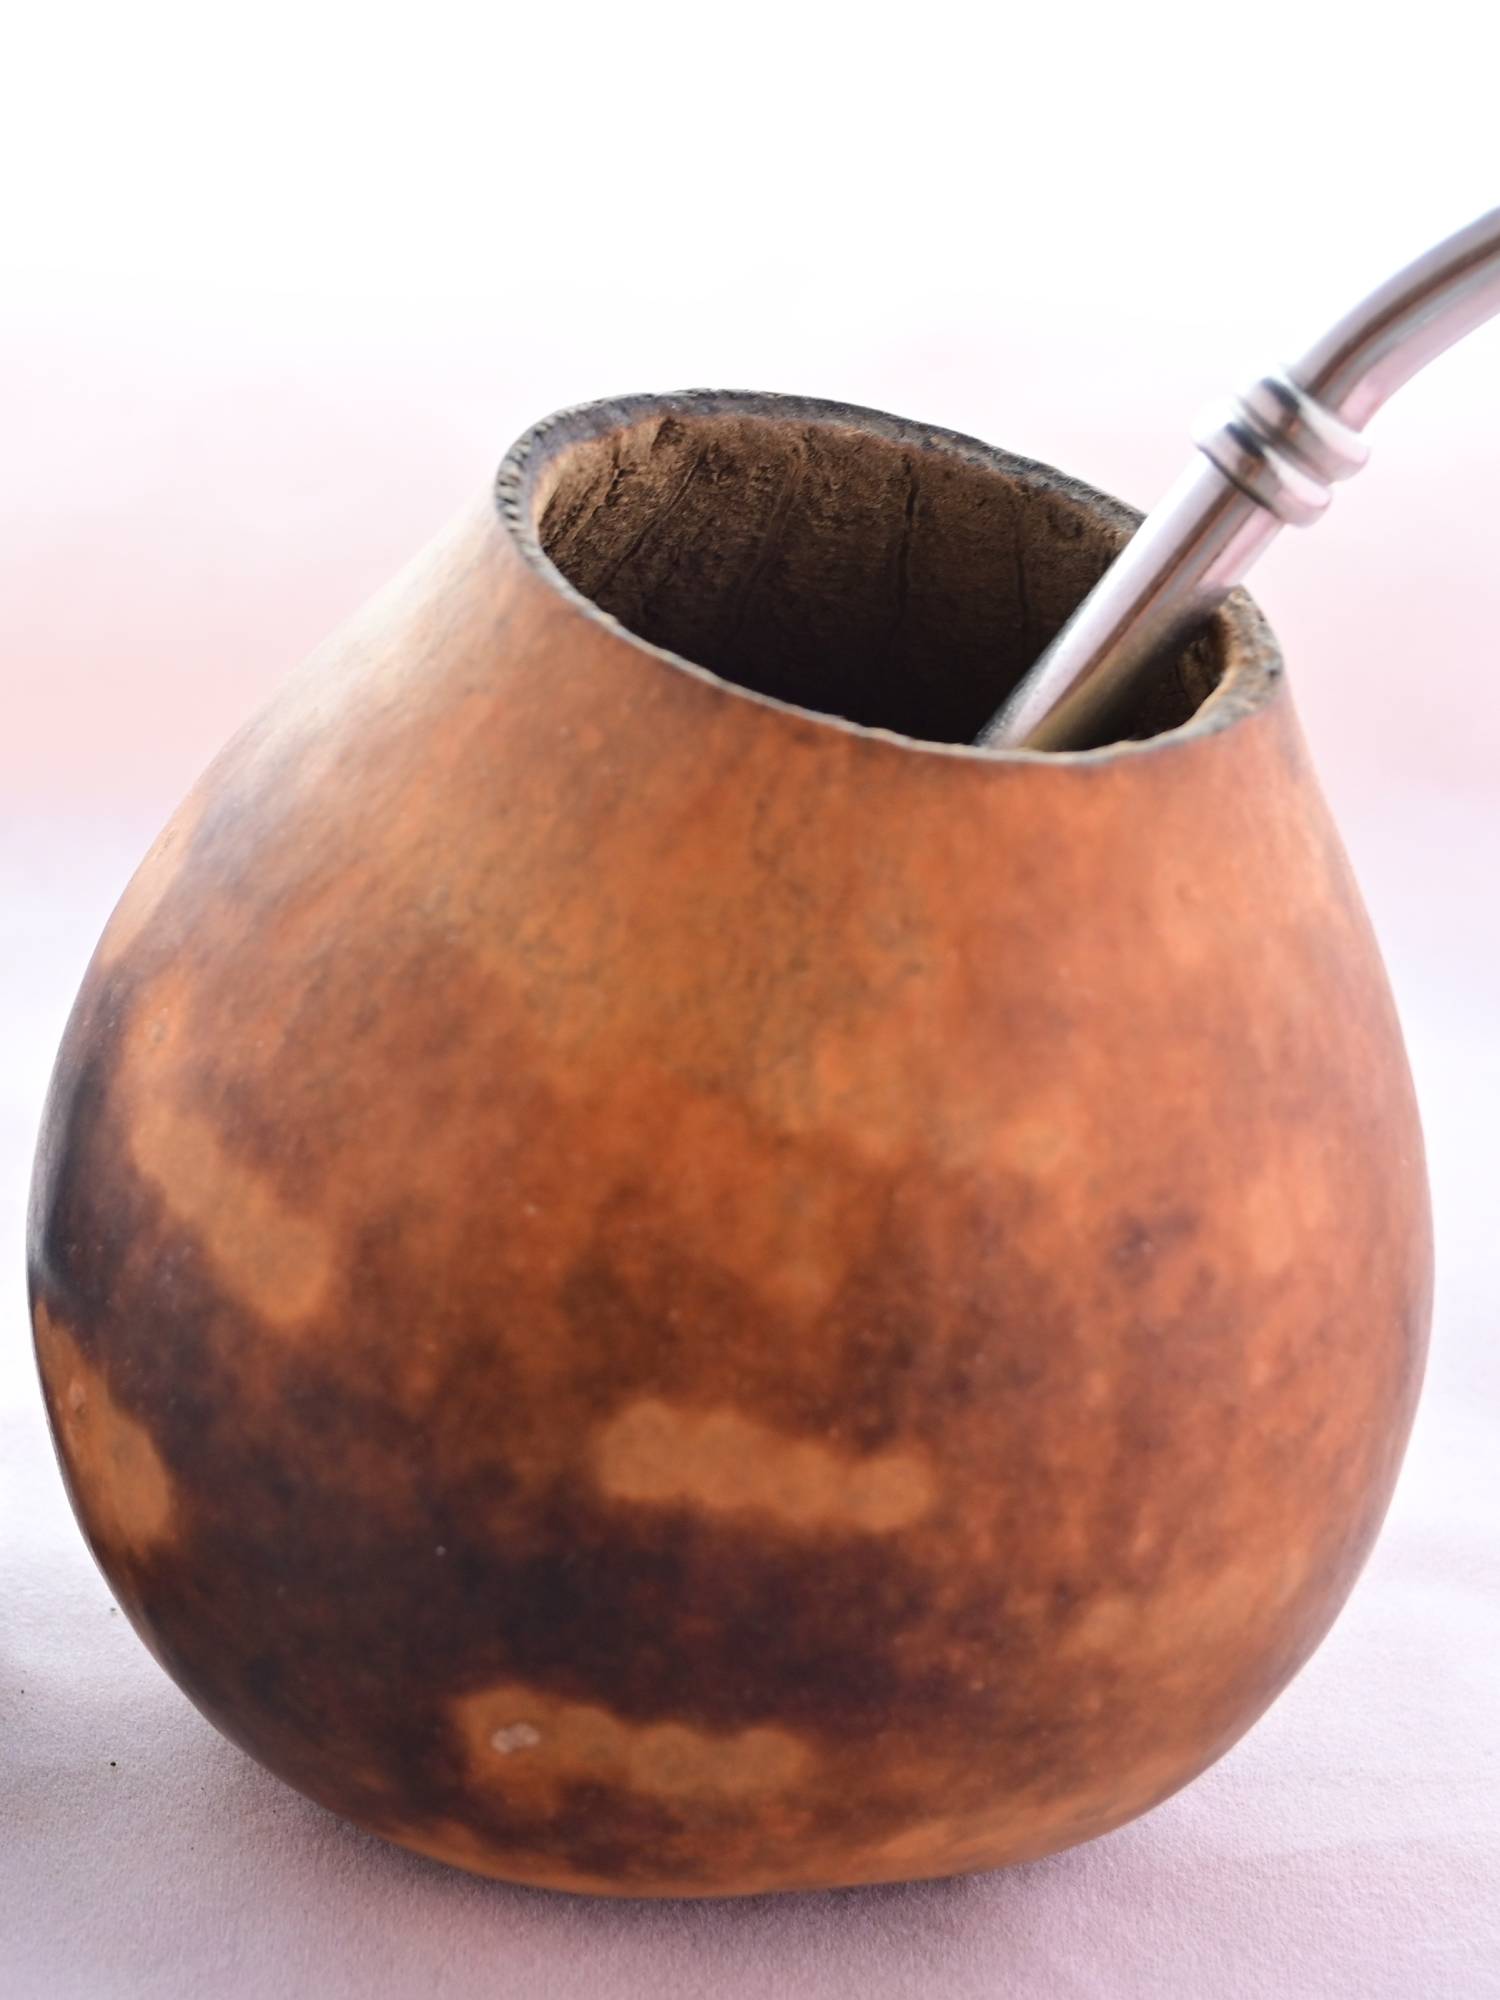 The traditional drinking set up for Yerba Mate, featuring a brown gourd with a circle cut out at the top. A metal straw comes from inside the gourd and hangs to the right.